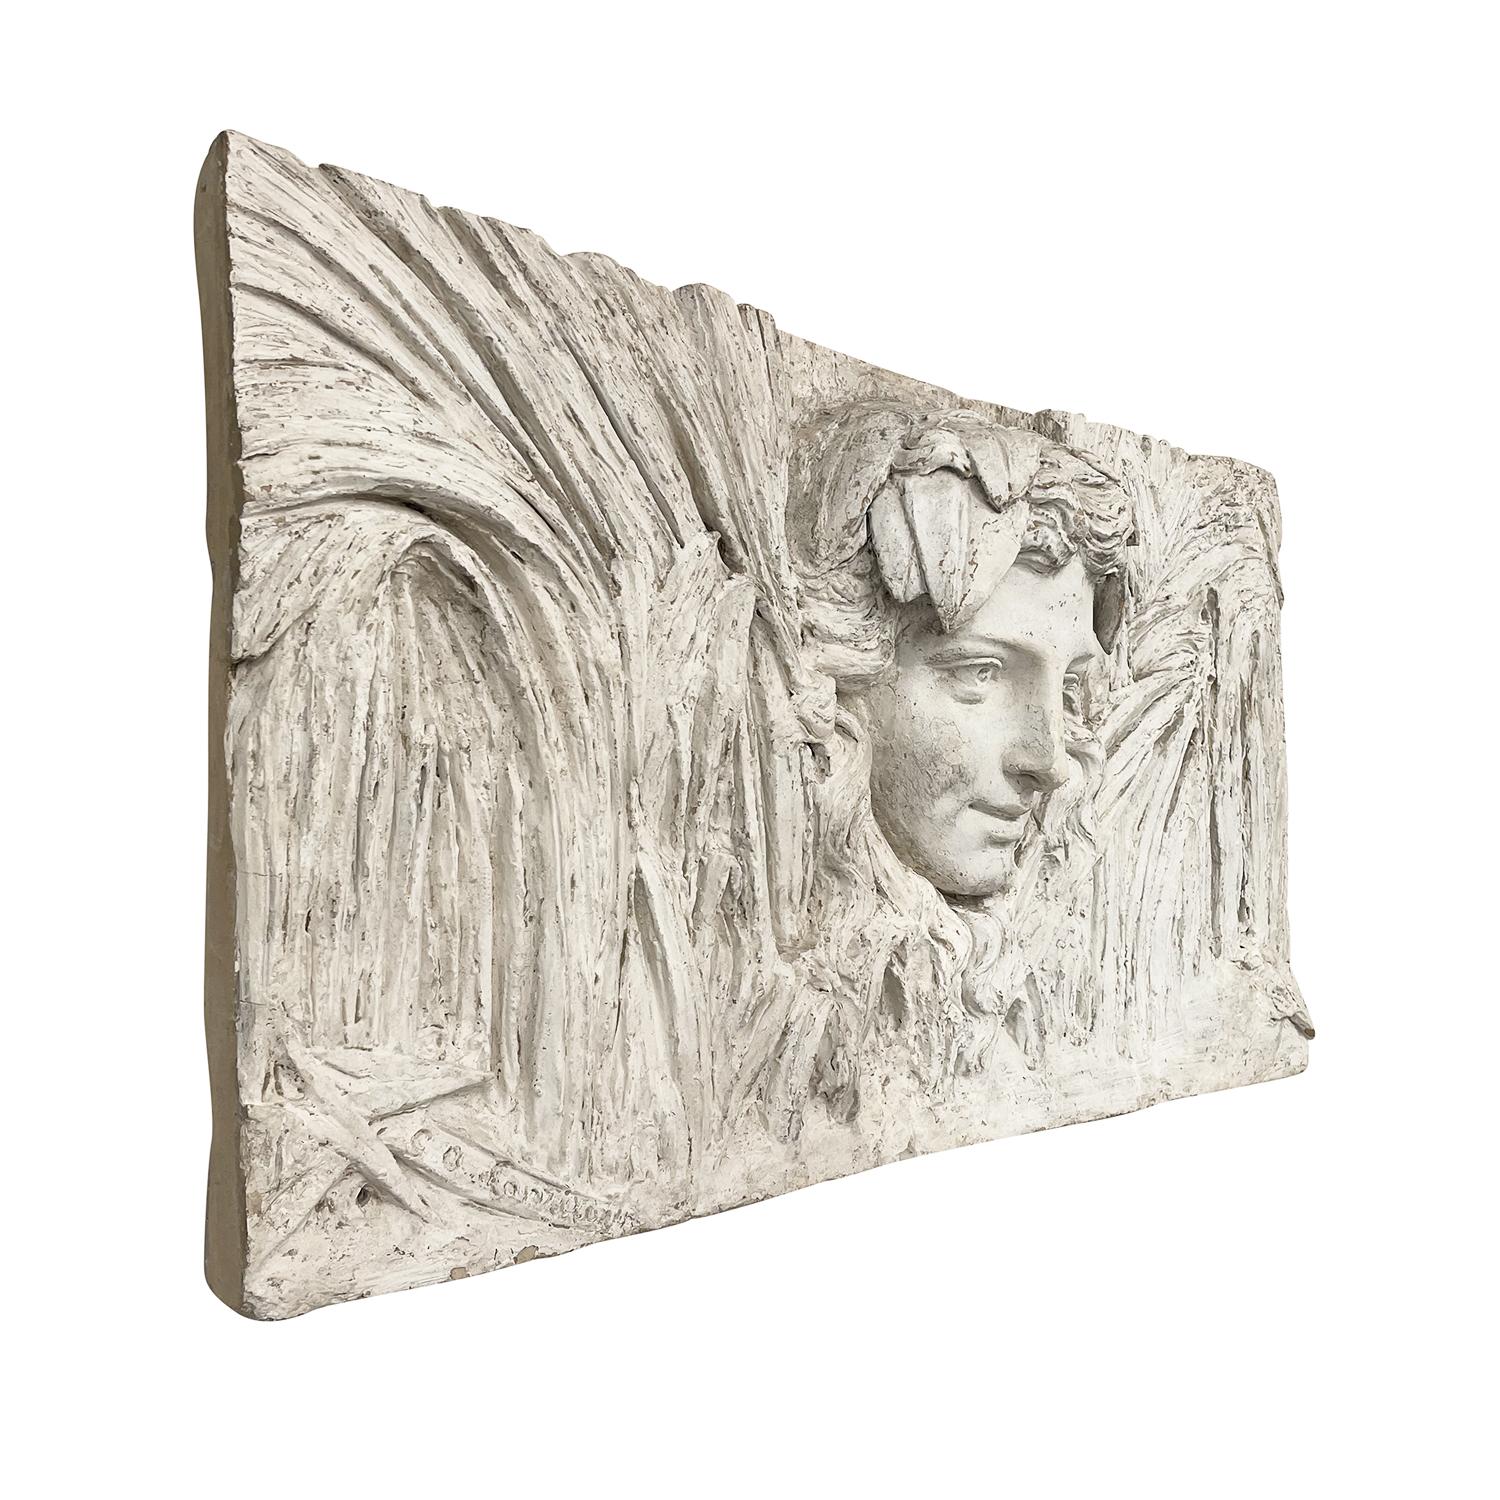 A white, vintage Art Deco French wall, bas relief of a female head made of hand crafted plaster, in good condition. Signed on the lower left. Not recommended for exterior use. Wear consistent with age and use. Circa 1920 - 1930, Paris, France.